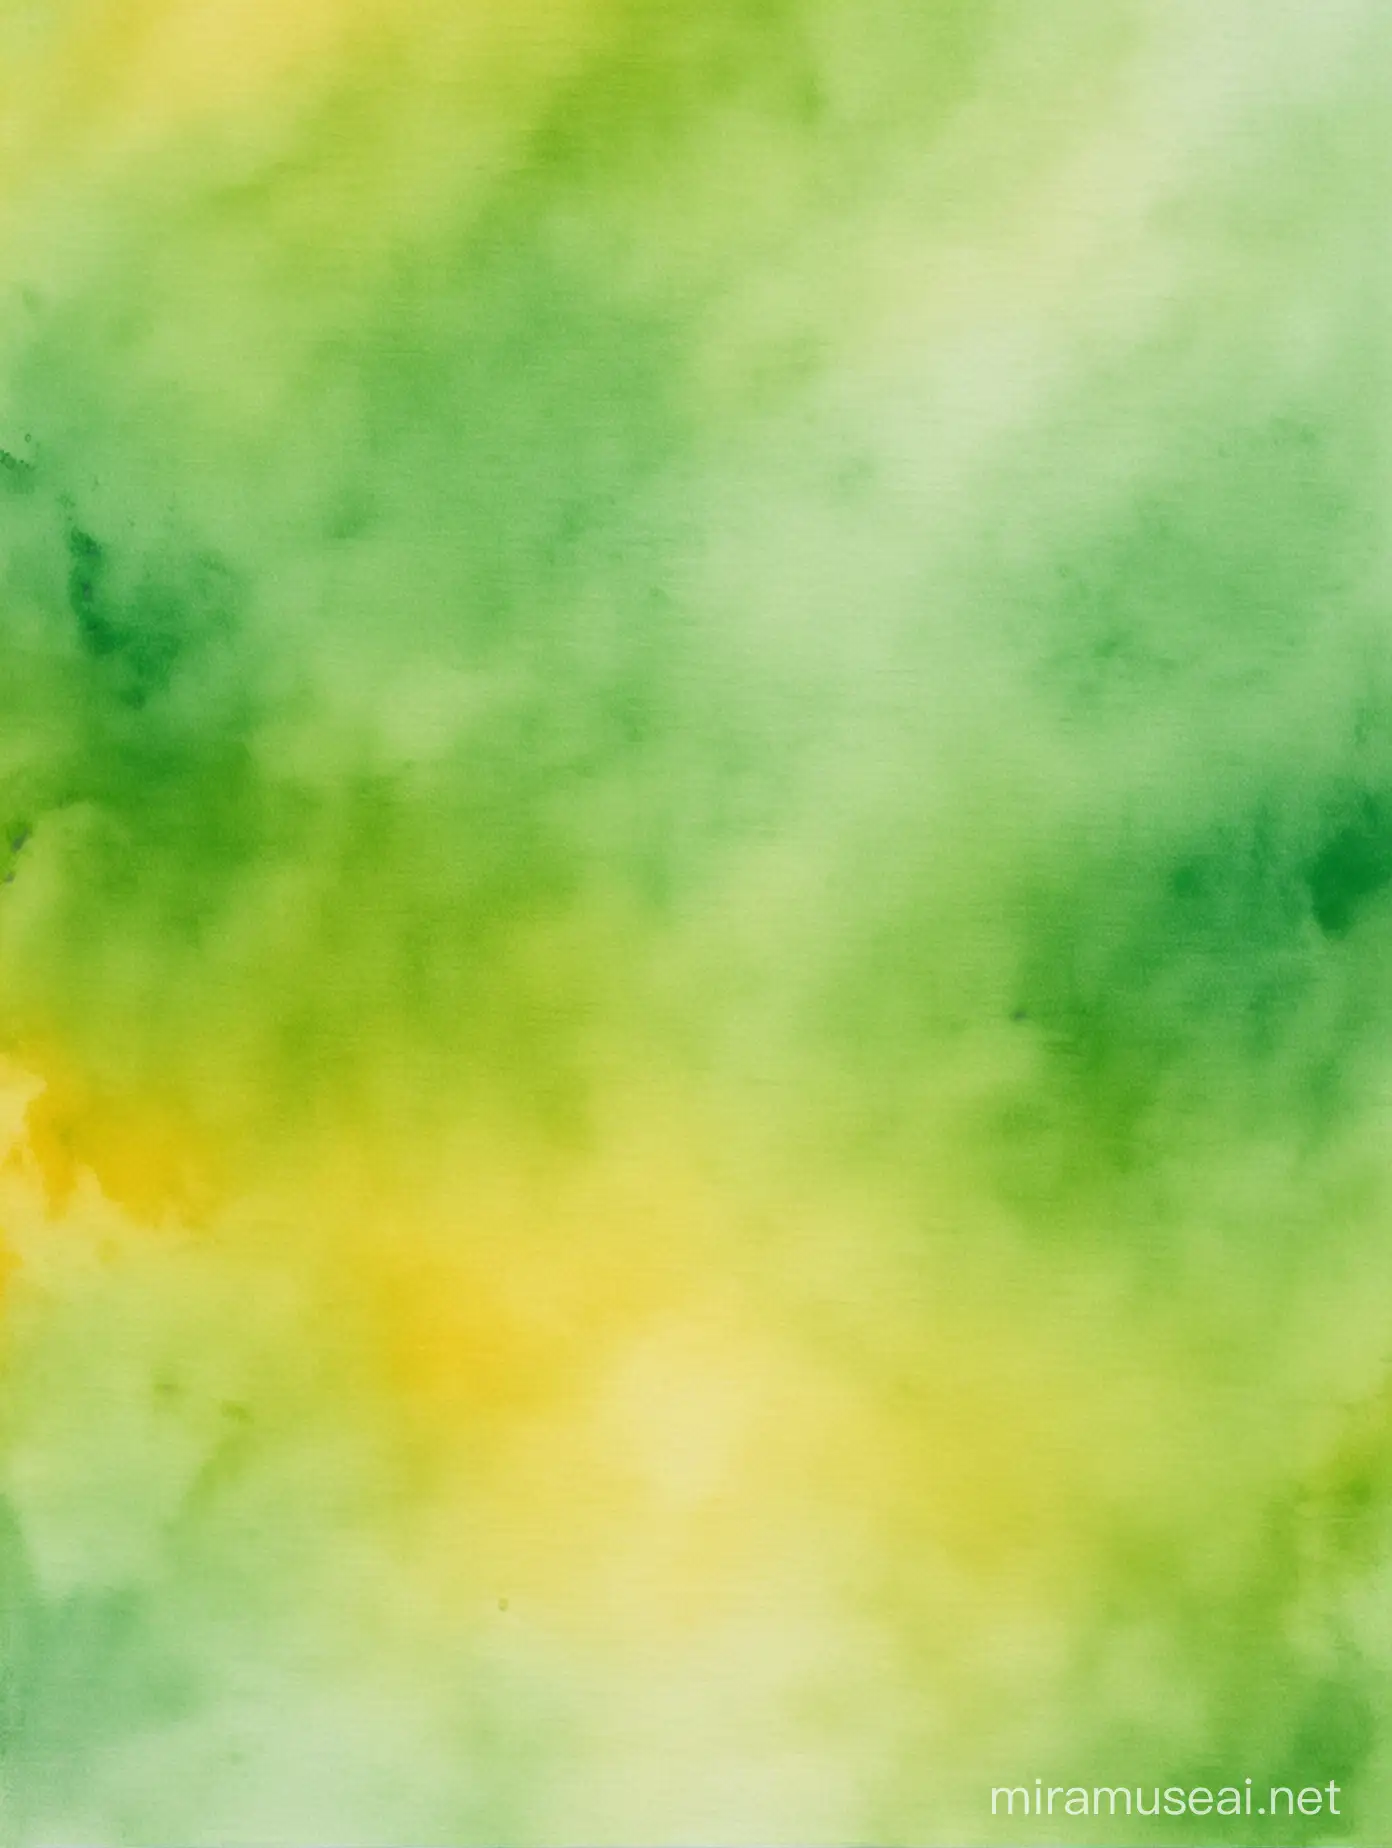 Vibrant Green and Yellow Watercolor Background